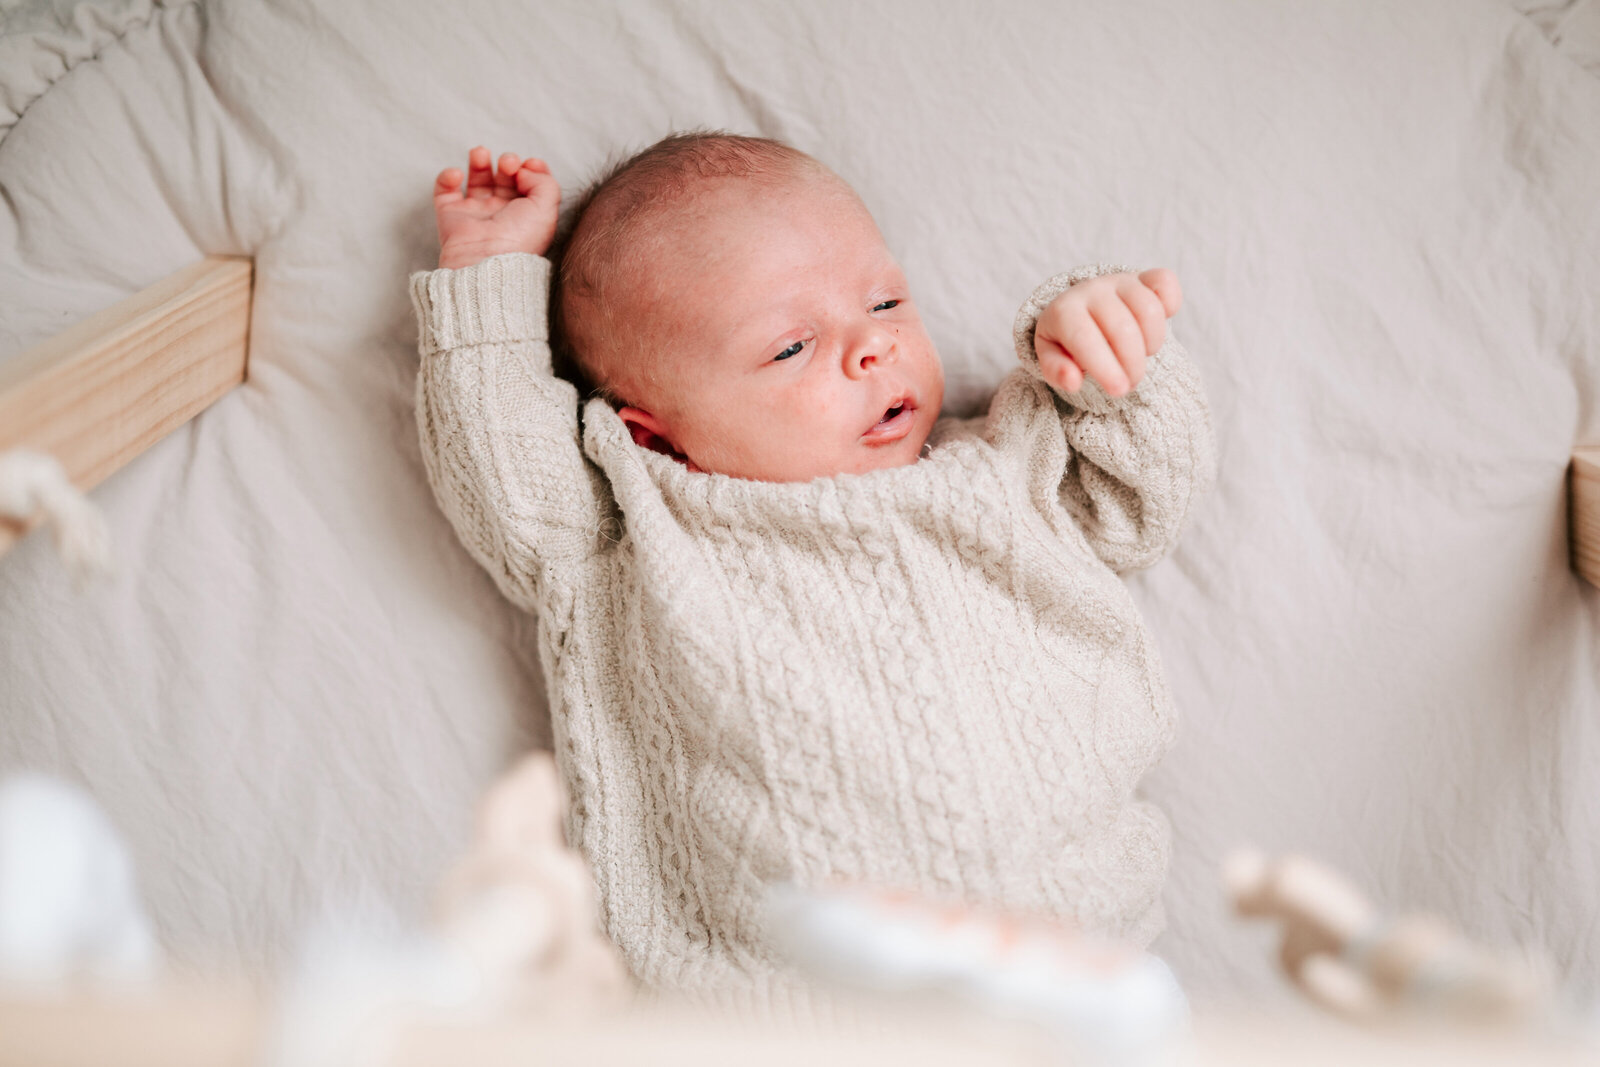 Collingwood-In-Home-Newborn-Photography (30)